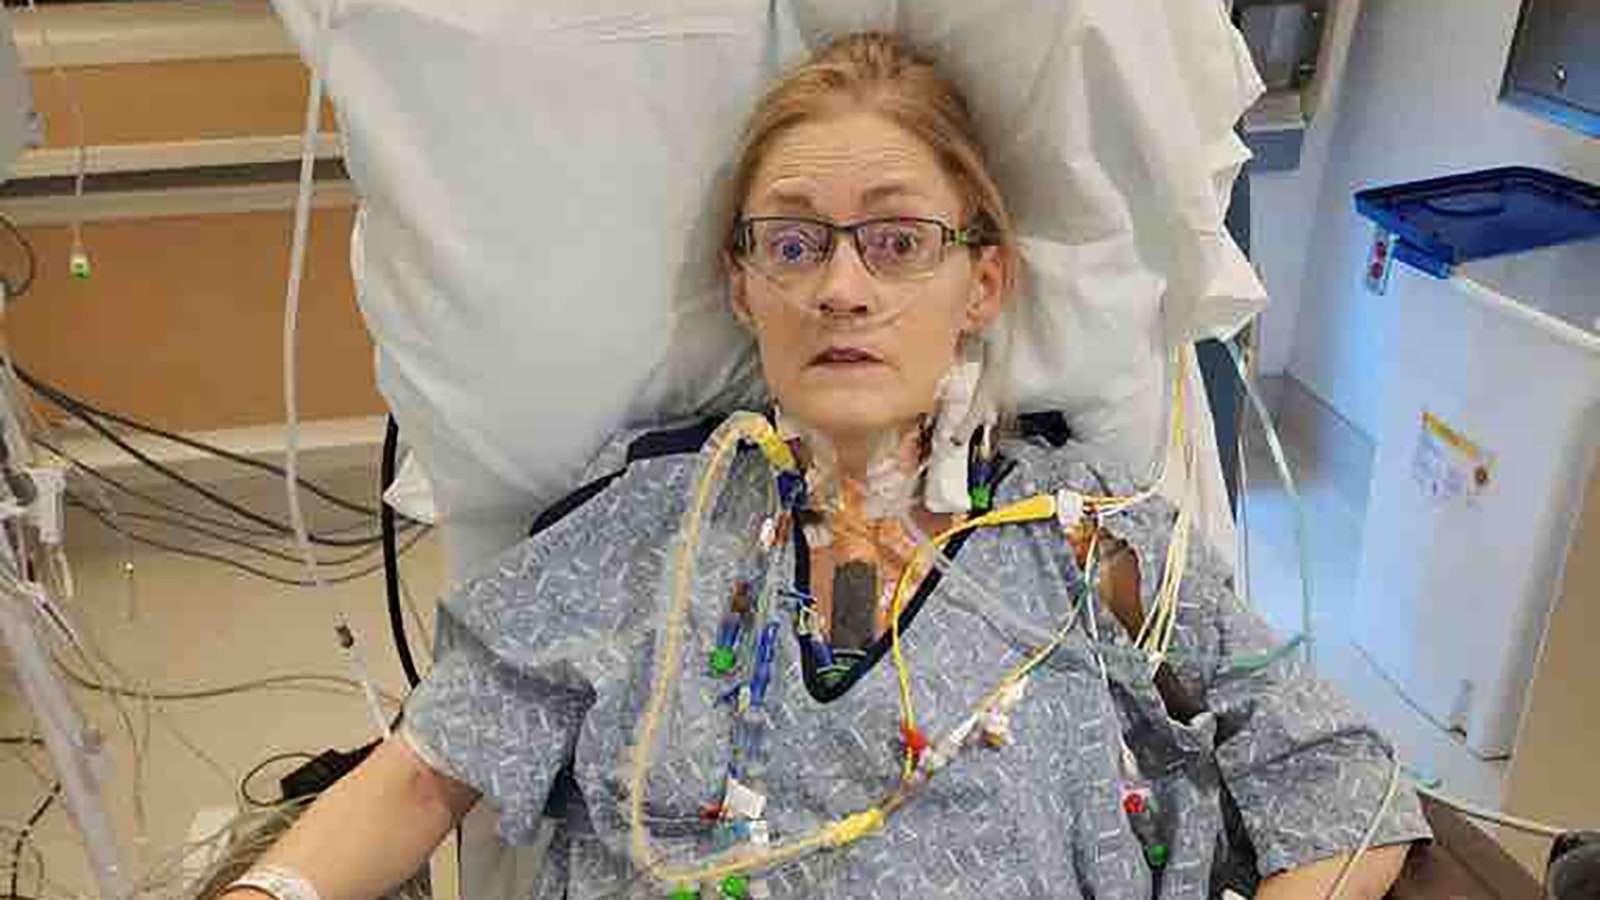 Jenn Green recovers after her third heart transplant in July 2023 at Cedars-Sinai Medical Center in California.